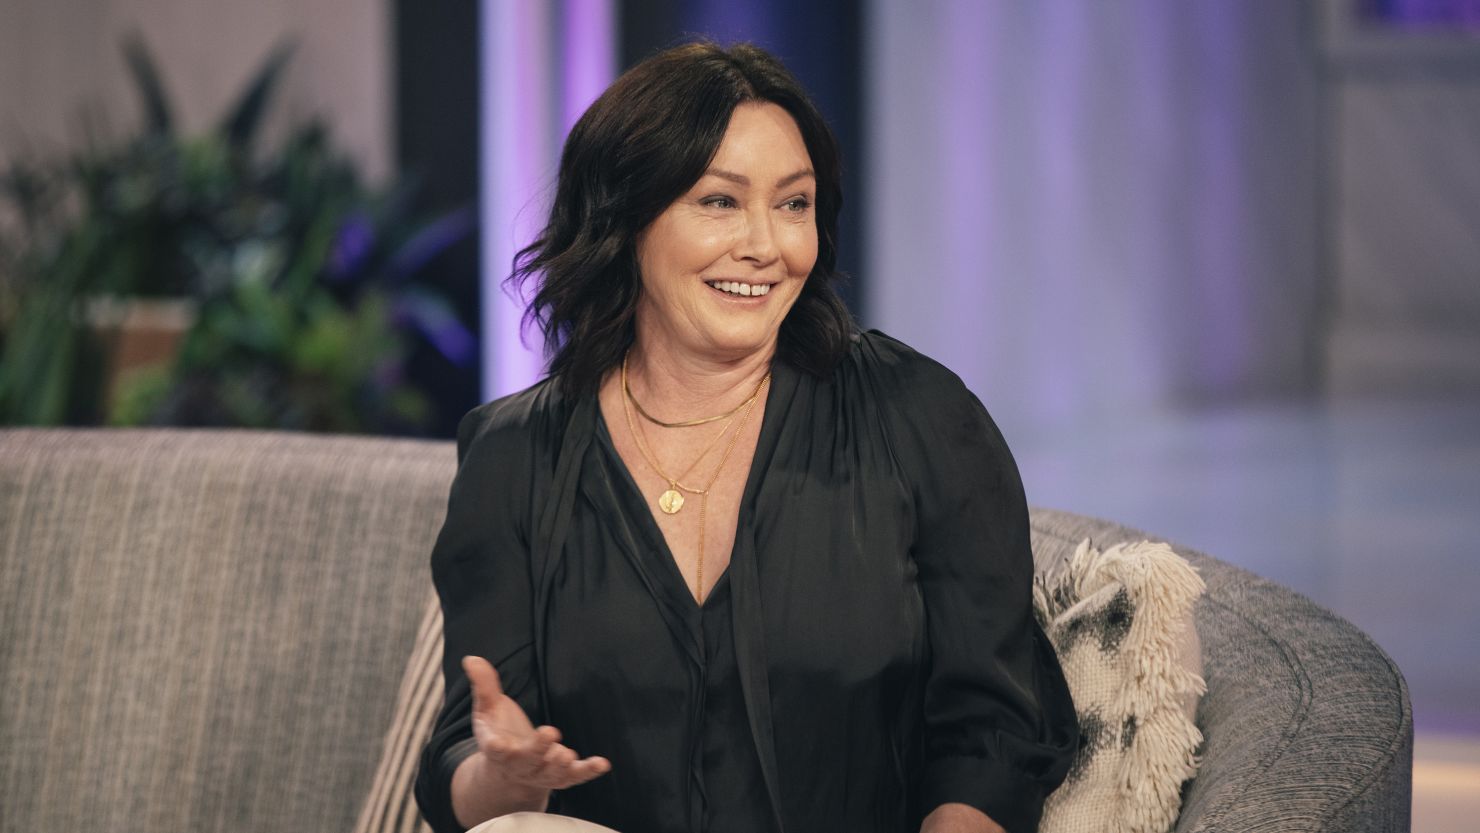 THE KELLY CLARKSON SHOW -- Episode 1014 -- Pictured: Shannen Doherty -- (Photo by: Weiss Eubanks/NBCUniversal/NBCU Photo Bank via Getty Images)